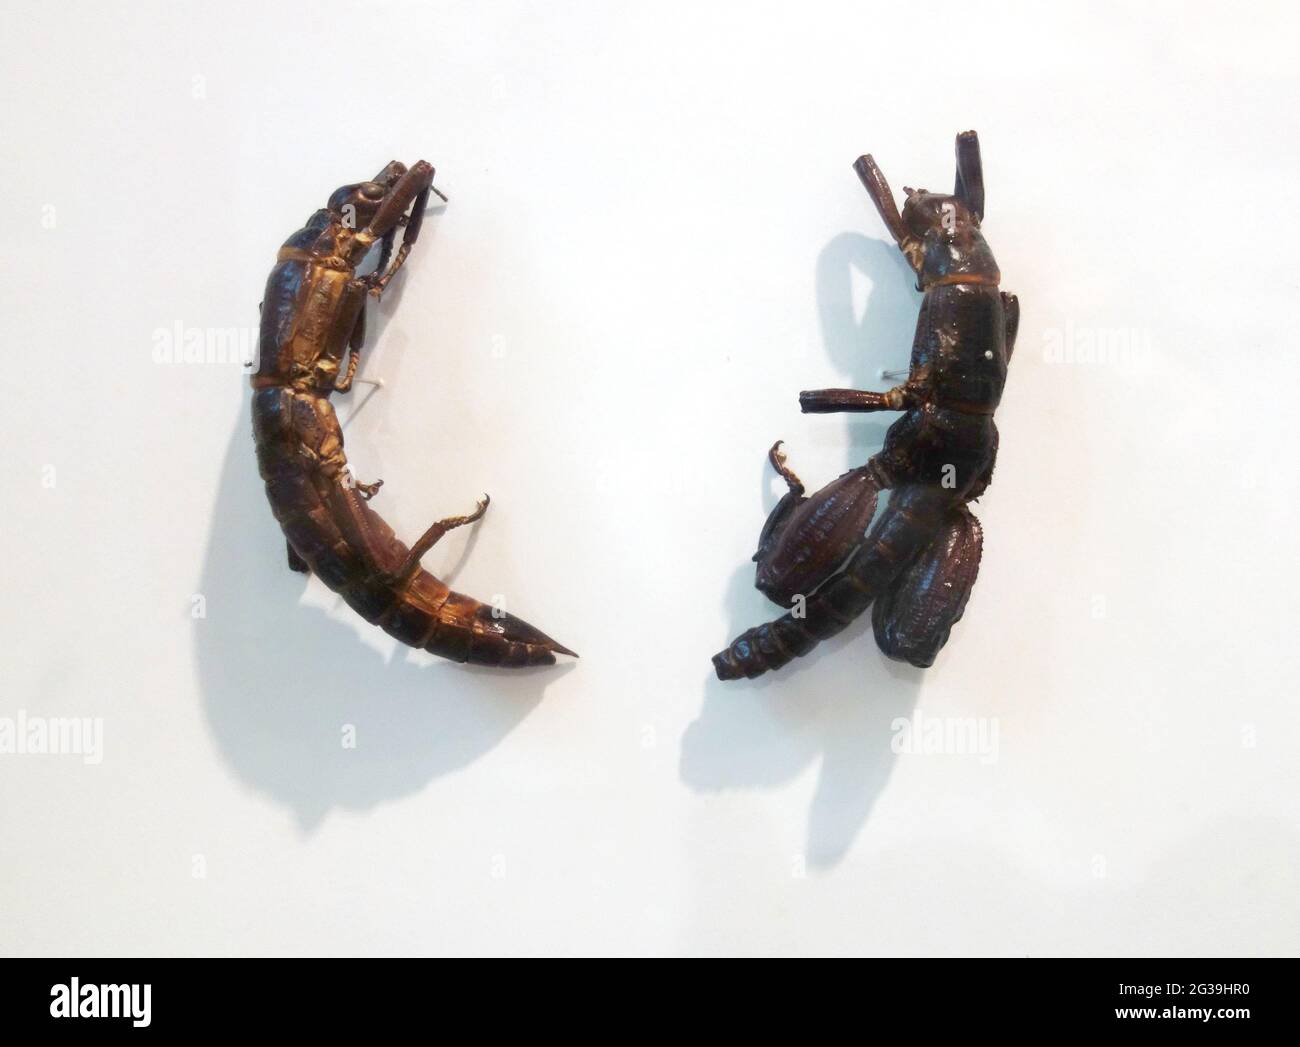 Two dried specimens of the near-extinct Lord Howe Island stick insect, (Dryococelus australis), Lord Howe Island Museum, NSW, Australia. No PR Stock Photo